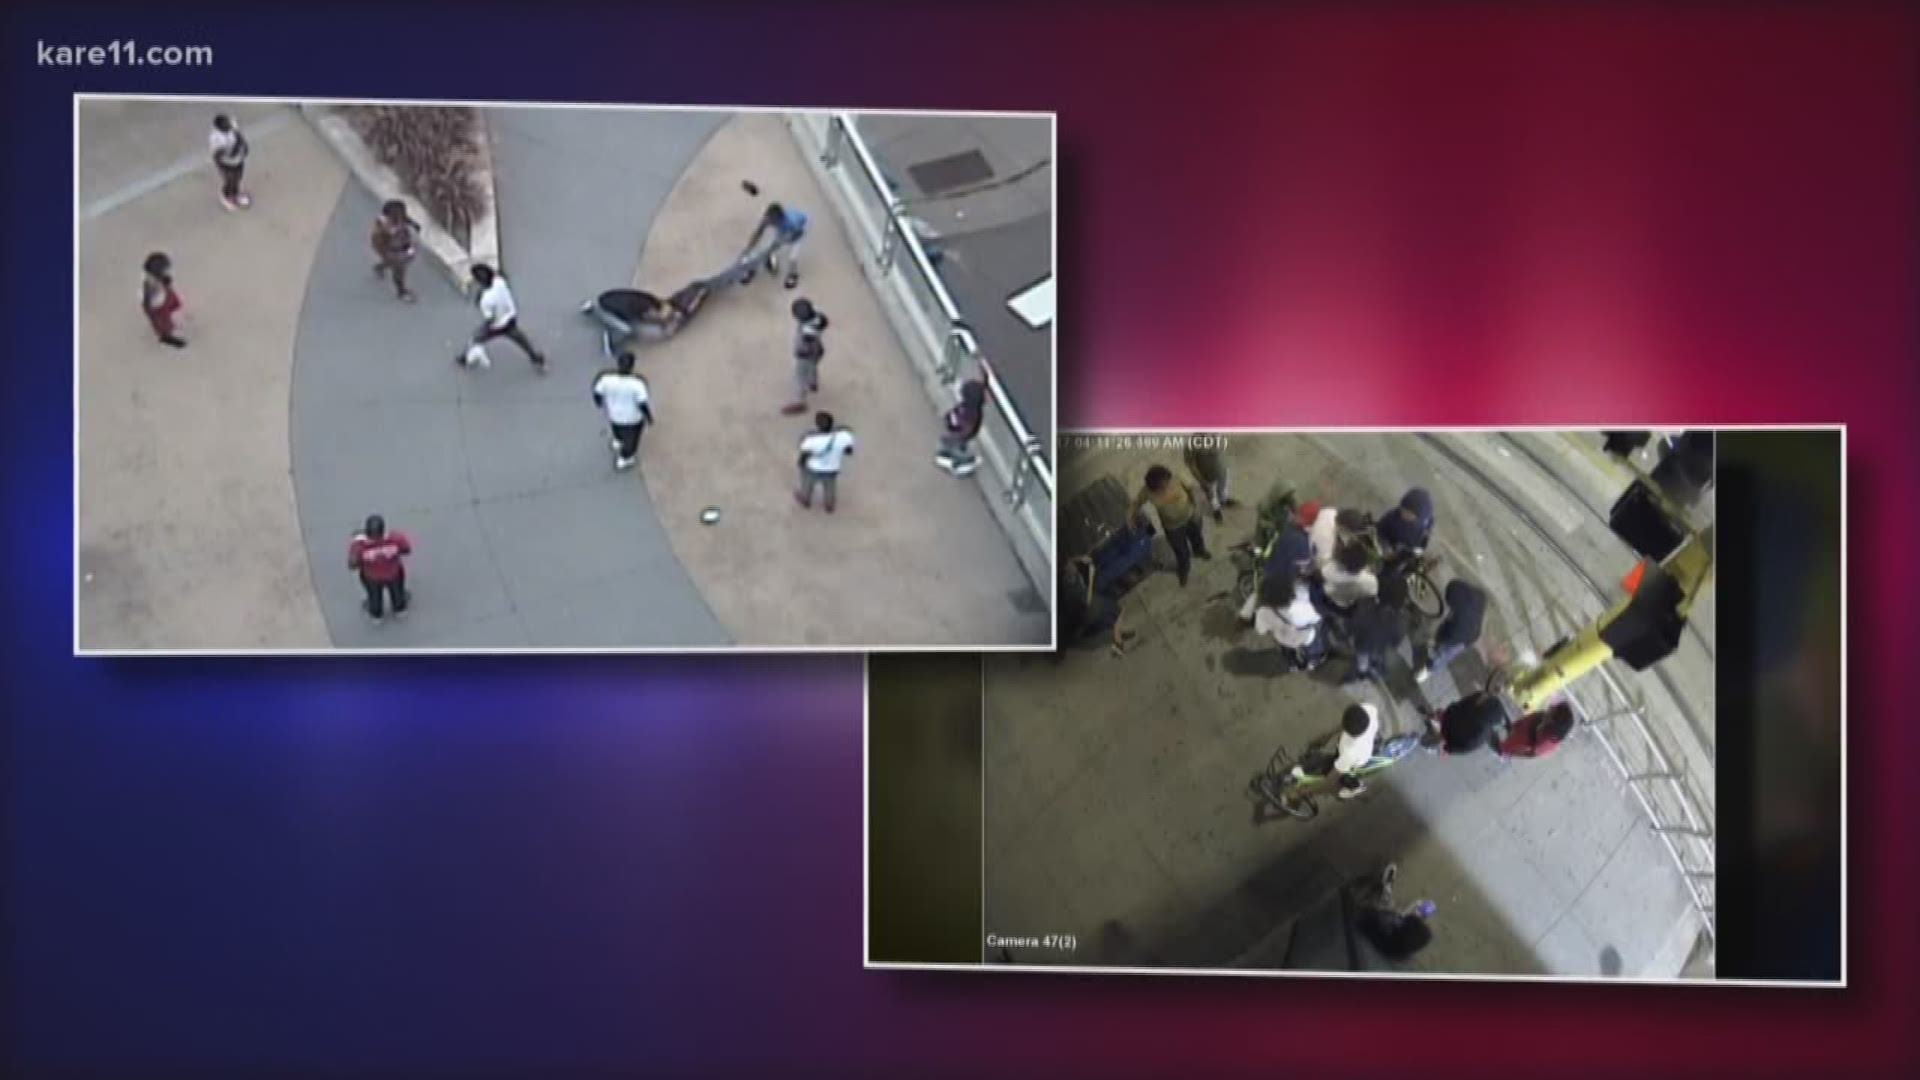 The shocking videos show mobs of people beating victims senseless in downtown Minneapolis.